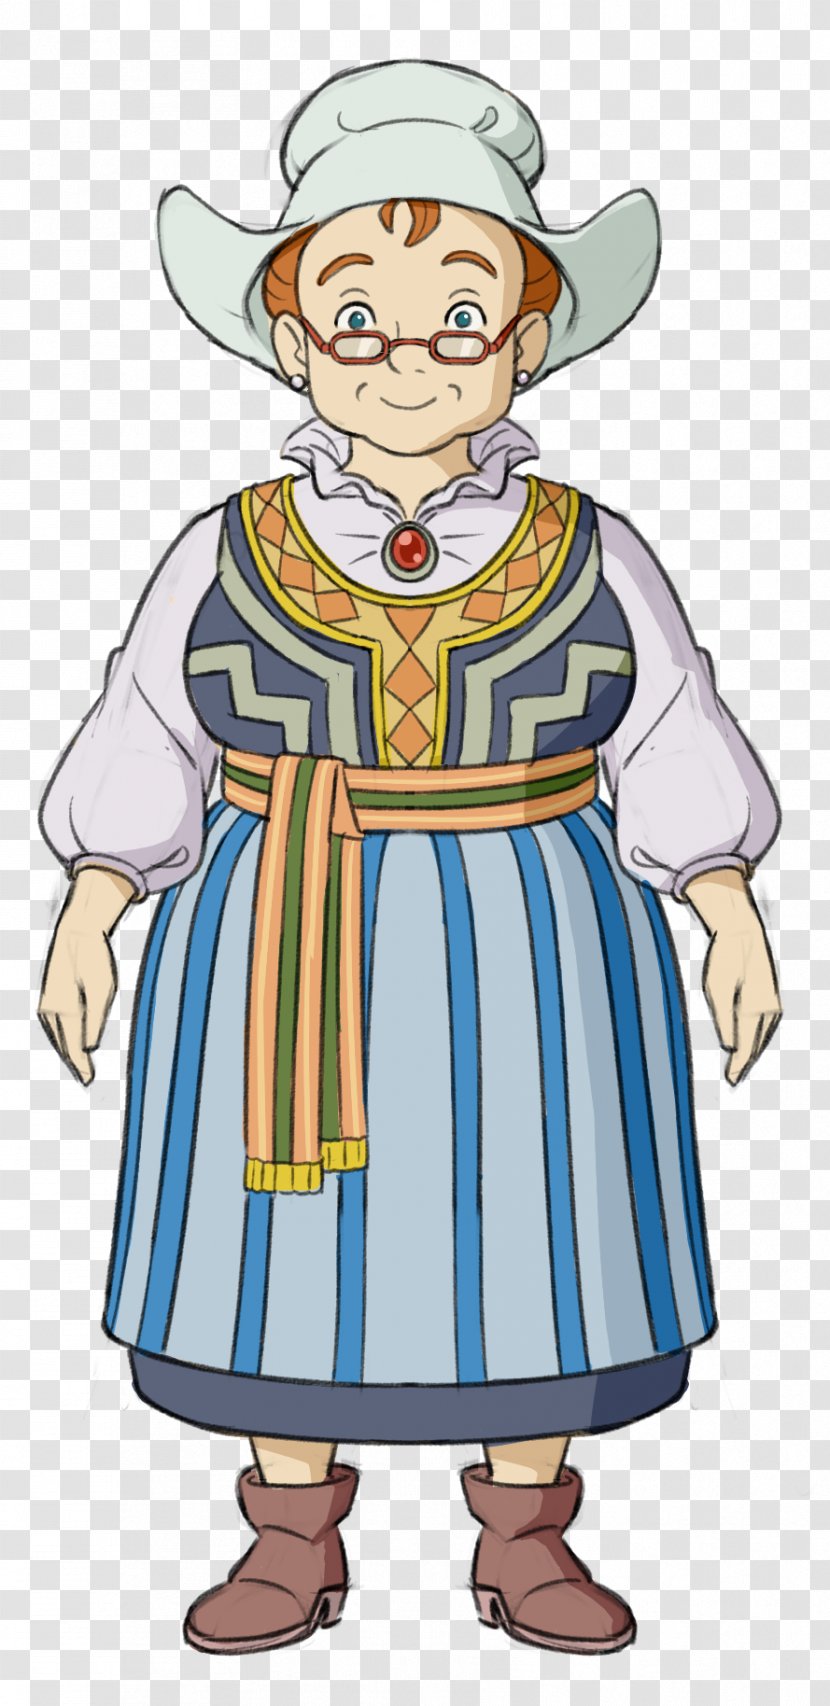 Ni No Kuni II: Revenant Kingdom Kuni: Wrath Of The White Witch PlayStation 4 Role-playing Game Video Walkthrough - Hand - Fiction Transparent PNG